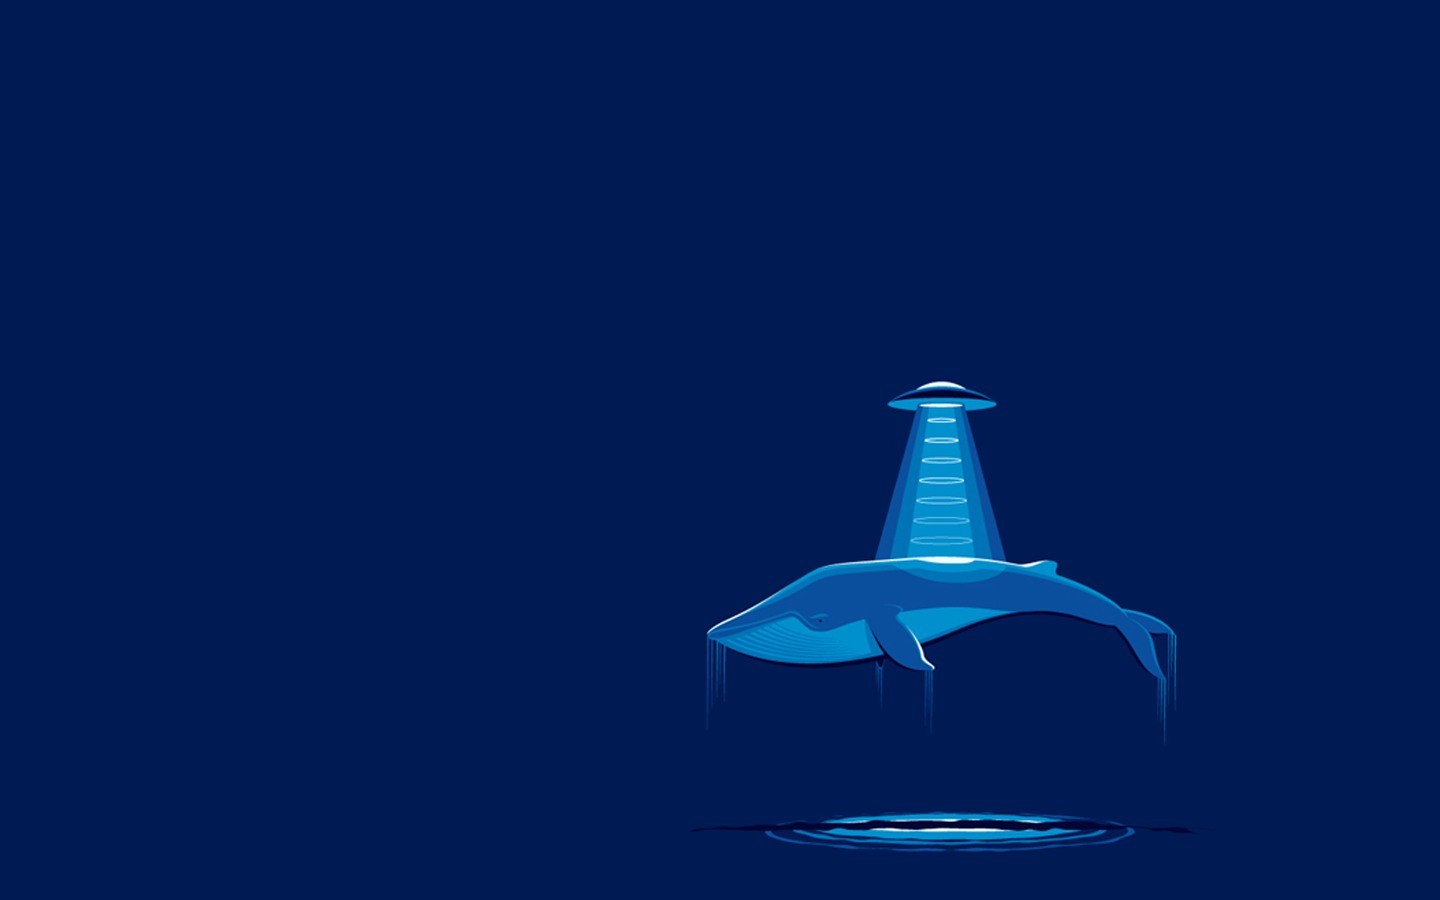 General 1440x900 The Hitchhiker's Guide to the Galaxy whale UFO simple background blue background animals mammals minimalism